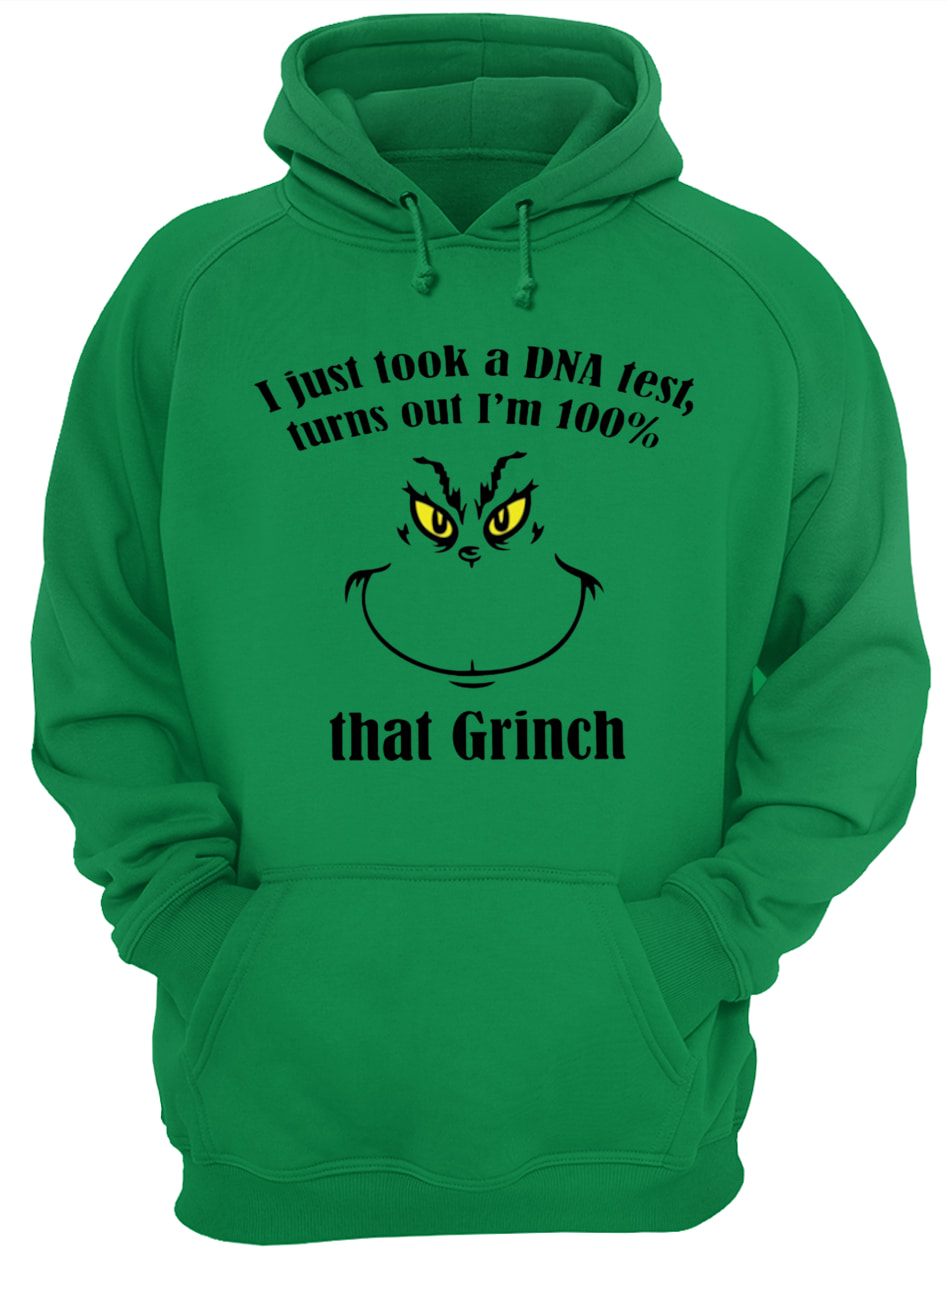 Just took a dna test turns out I'm 100% that grinch hoodie